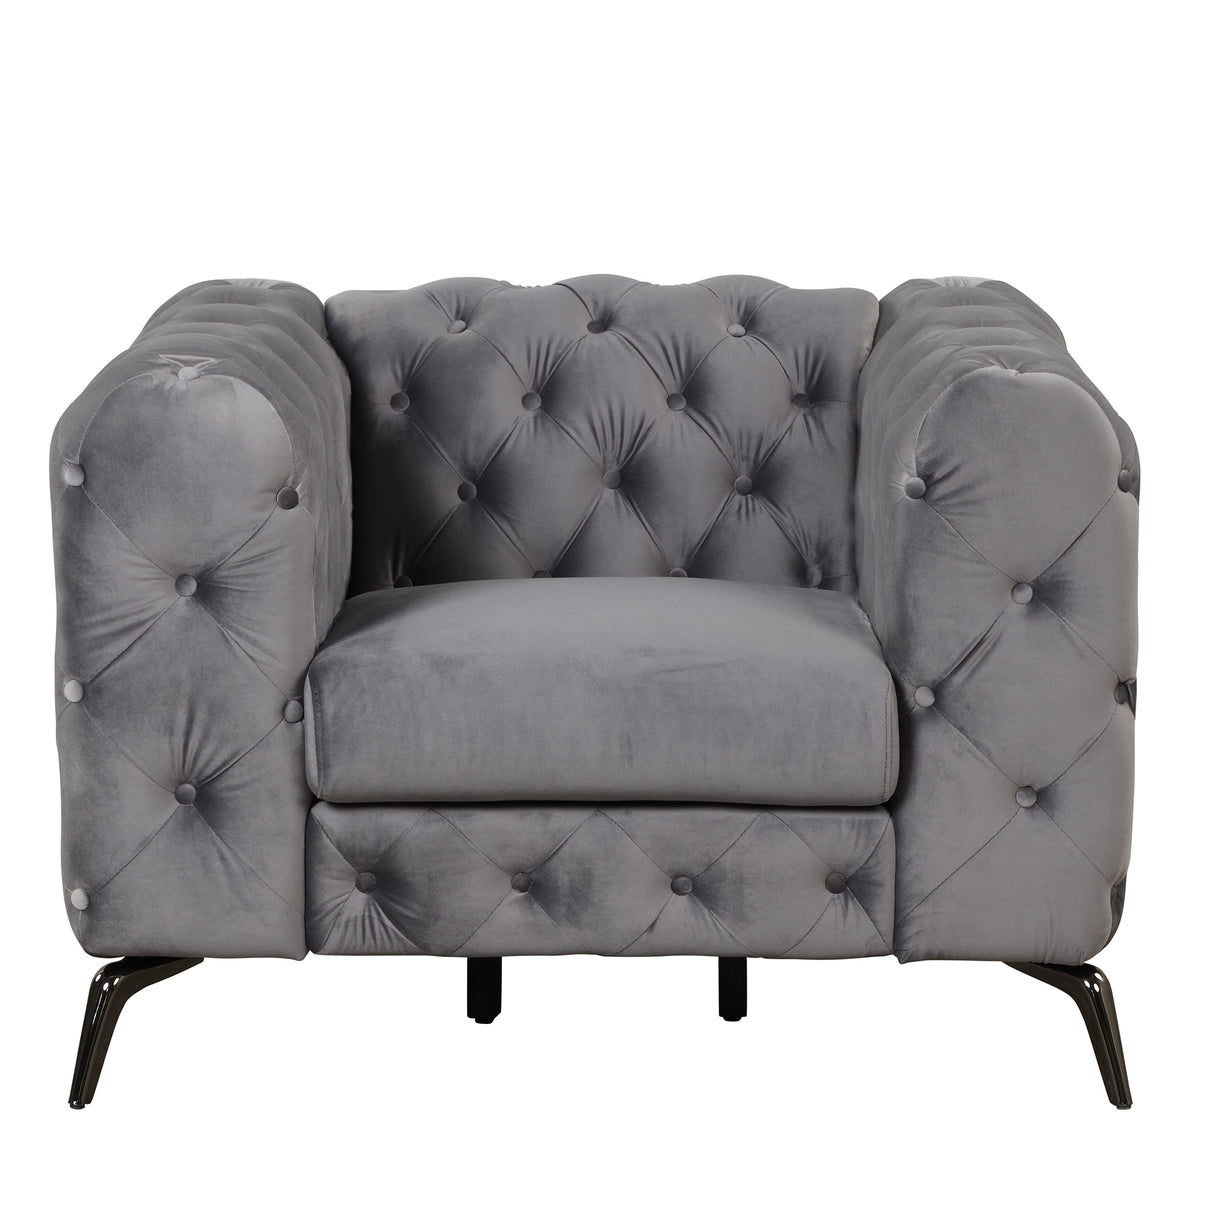 40.5" Velvet Upholstered Accent Sofa,Modern Single Sofa Chair with Button Tufted Back,Modern Single Couch for Living Room,Bedroom,or Small Space,Gray Home Elegance USA